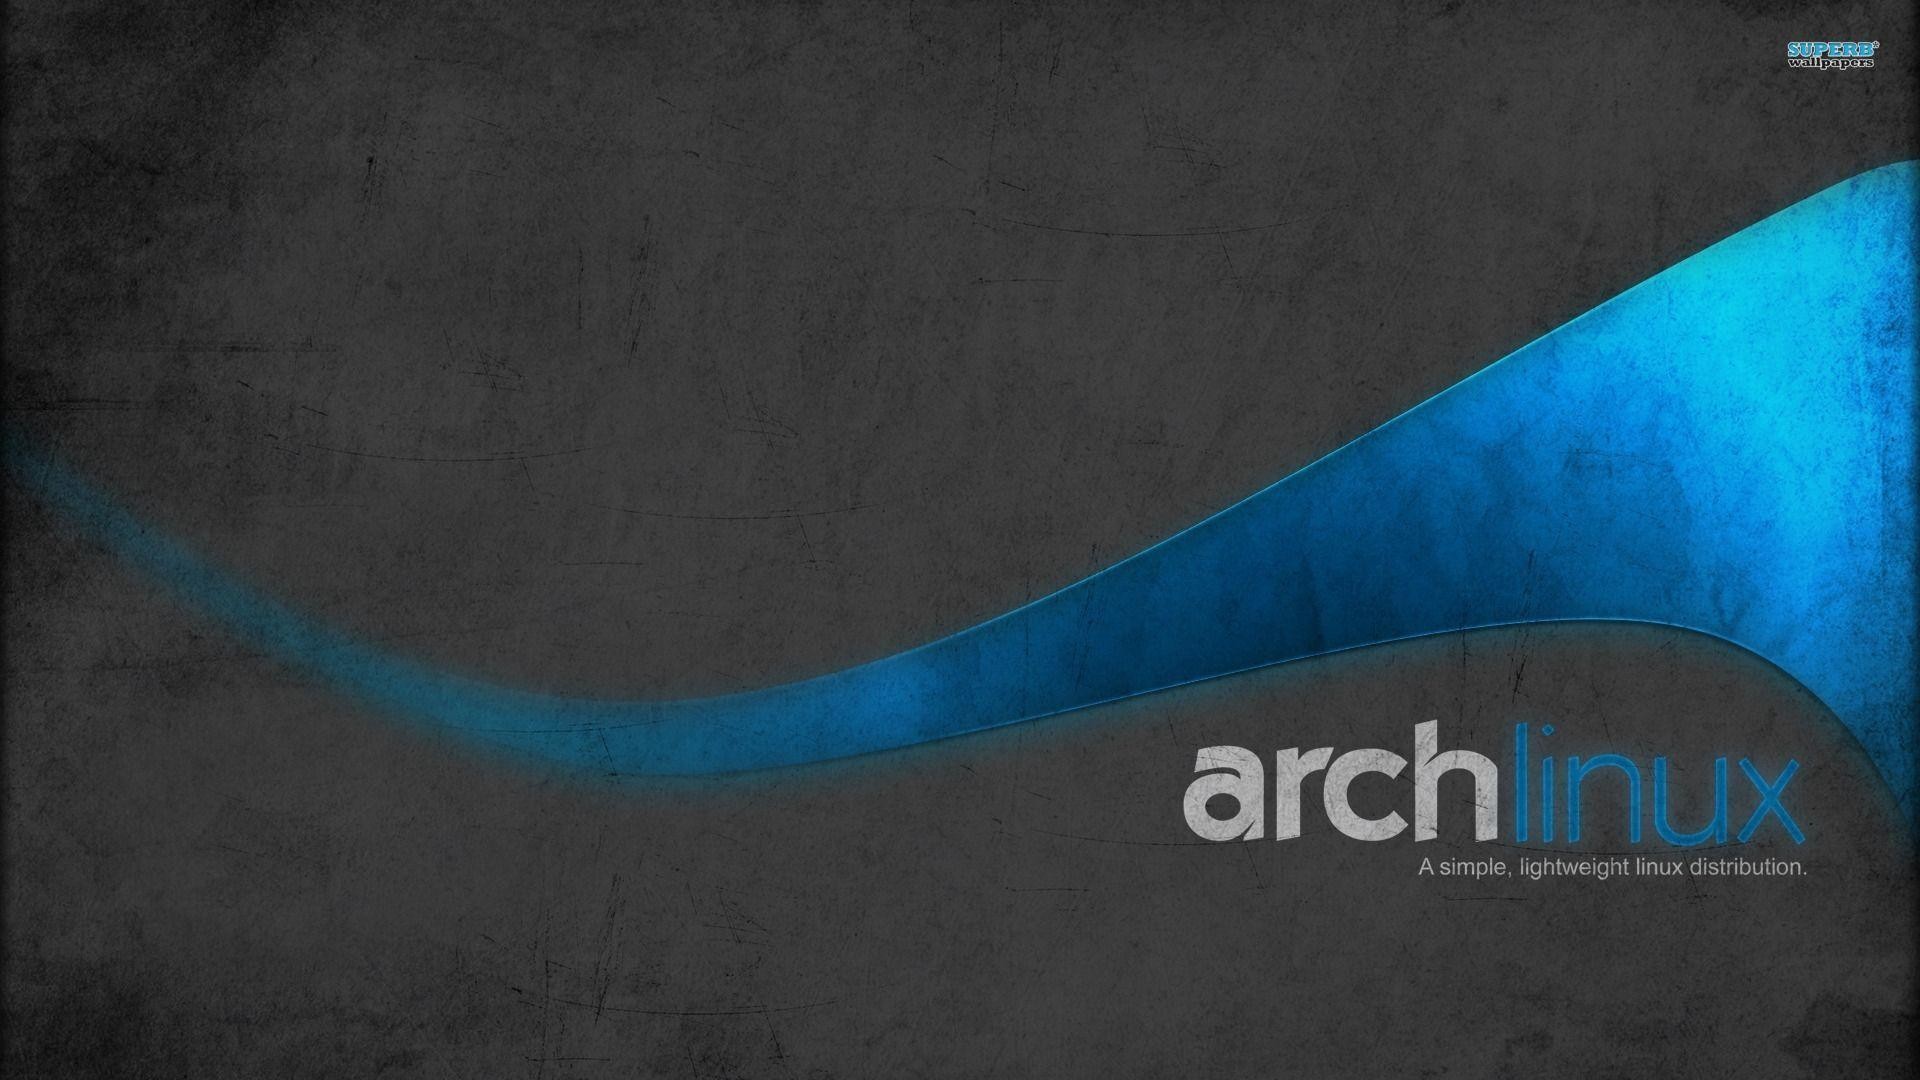 1920x1080 Arch Linux Wallpaper Free 10589 HD Pictures | Best Wallpaper Photo